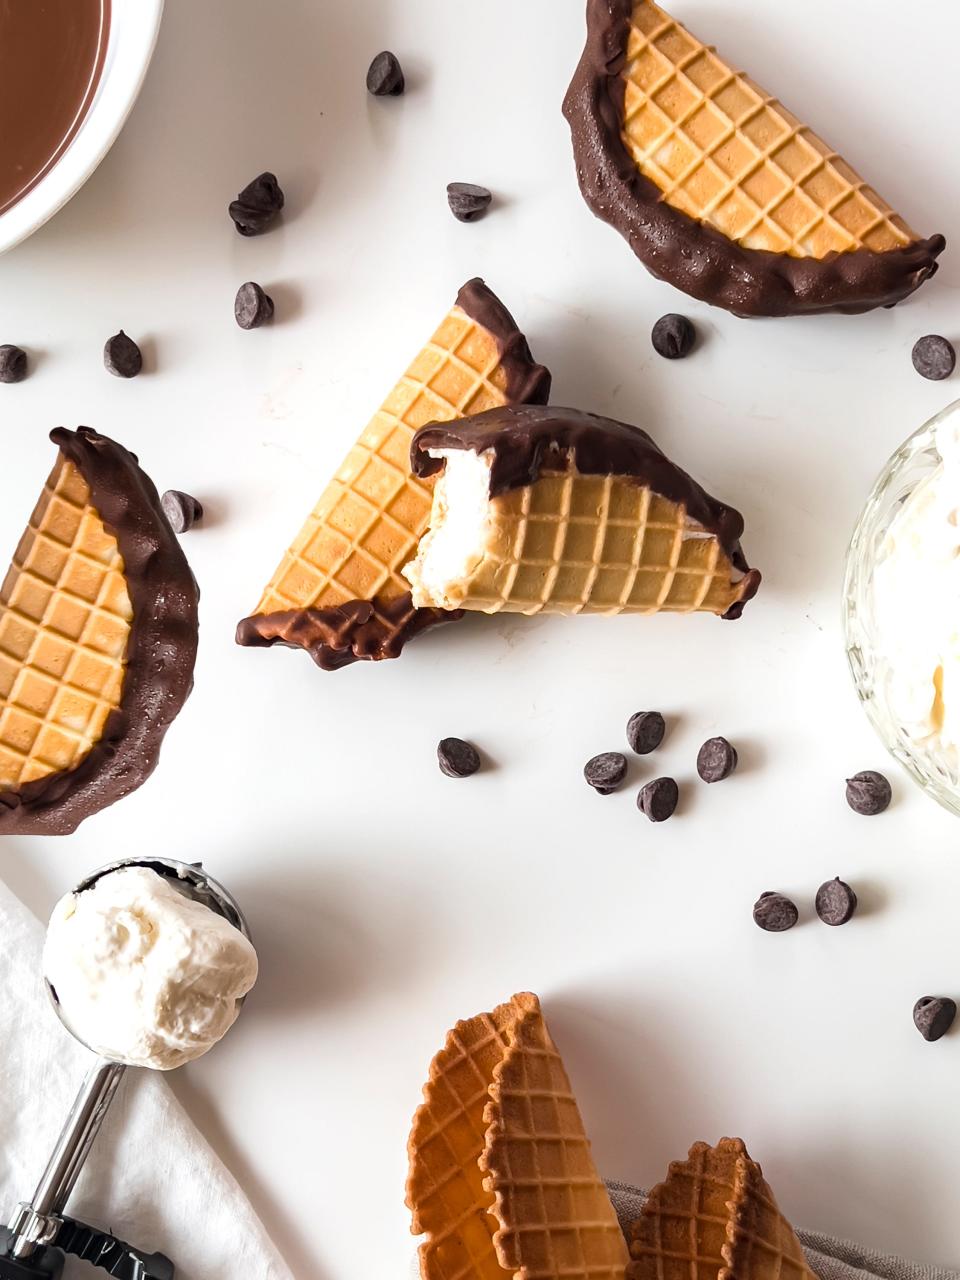 Enjoy your own Copycat Choco Tacos, inspired by Klondike's Choco Tacos, an ice cream treat resembling a taco.